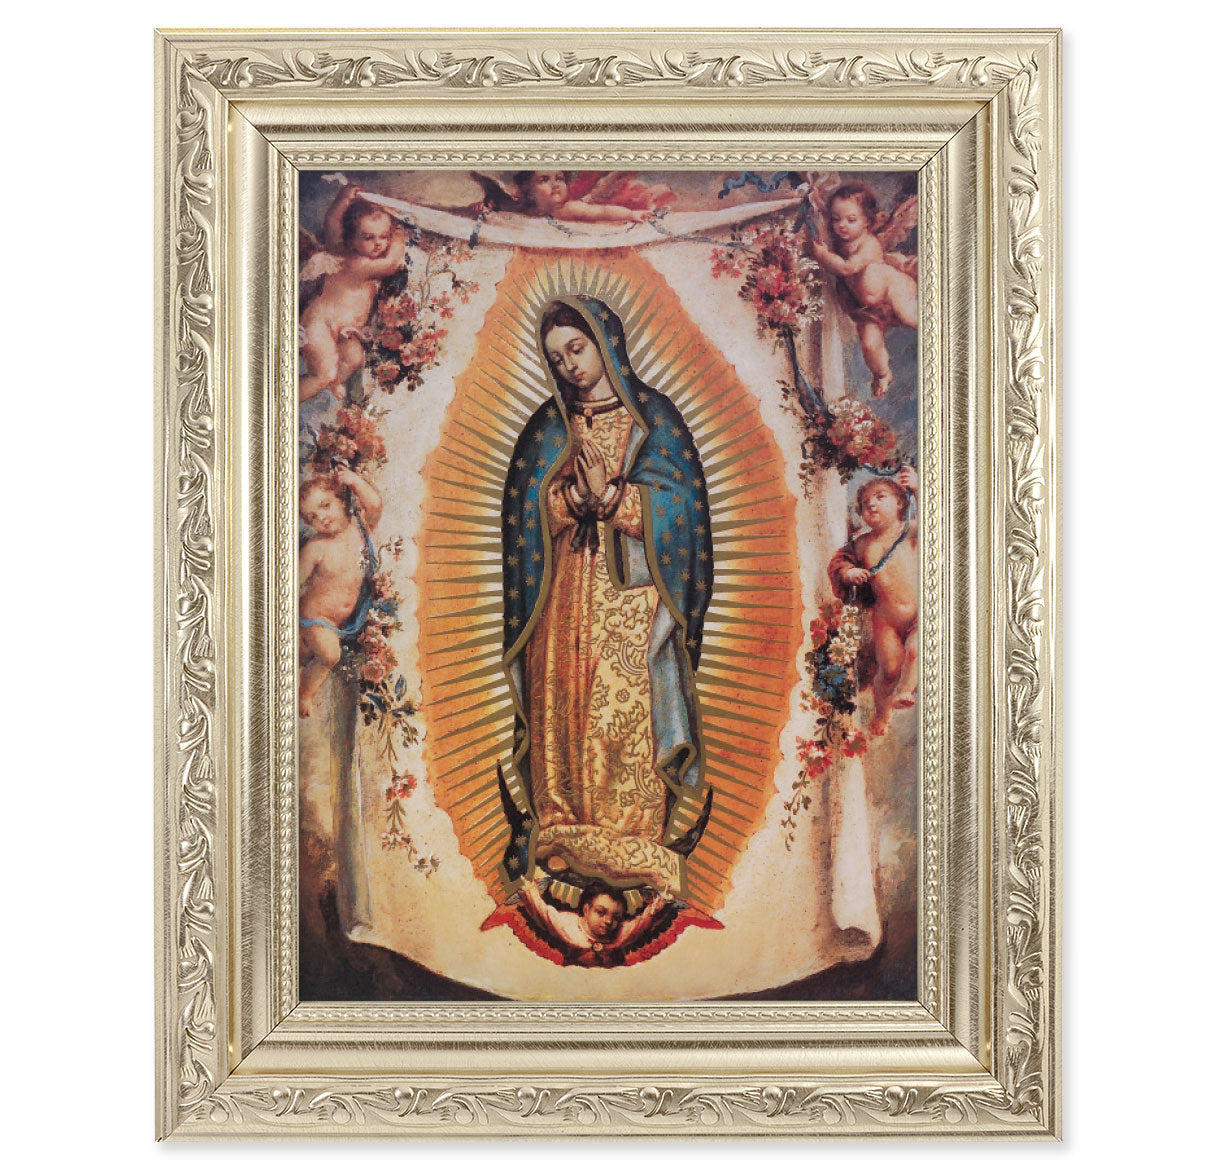 Our Lady of Guadalupe with Angels Silver Framed Art